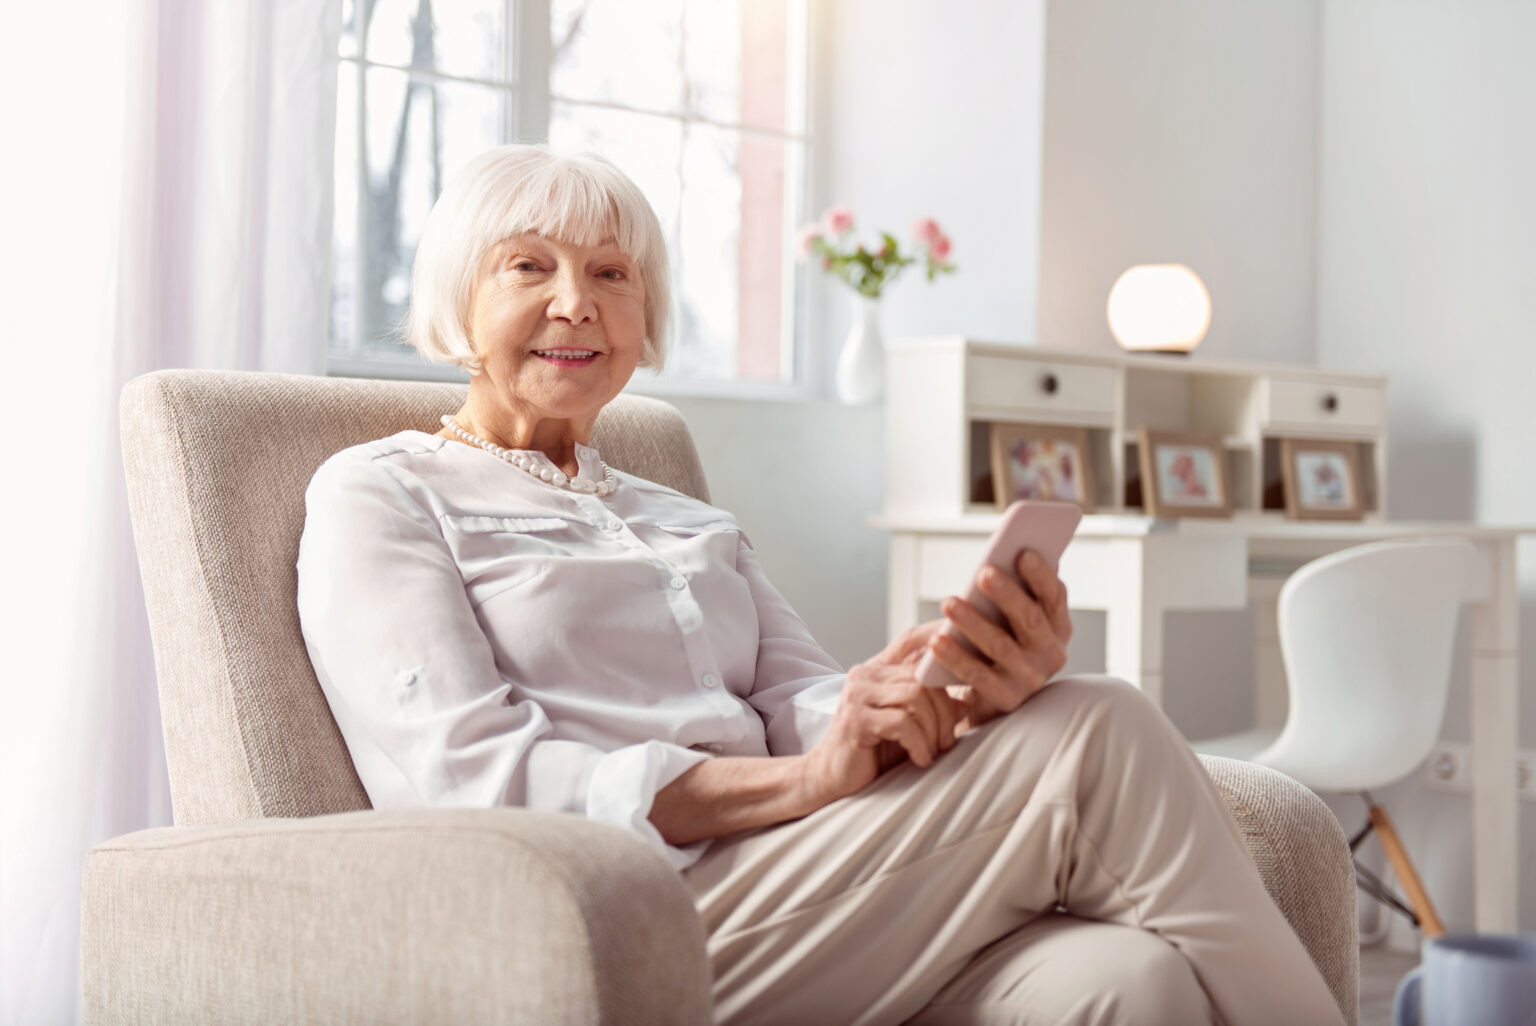 Advanced user. Cheerful senior woman sitting in an armchair and smiling at the camera while surfing the Internet on her phone